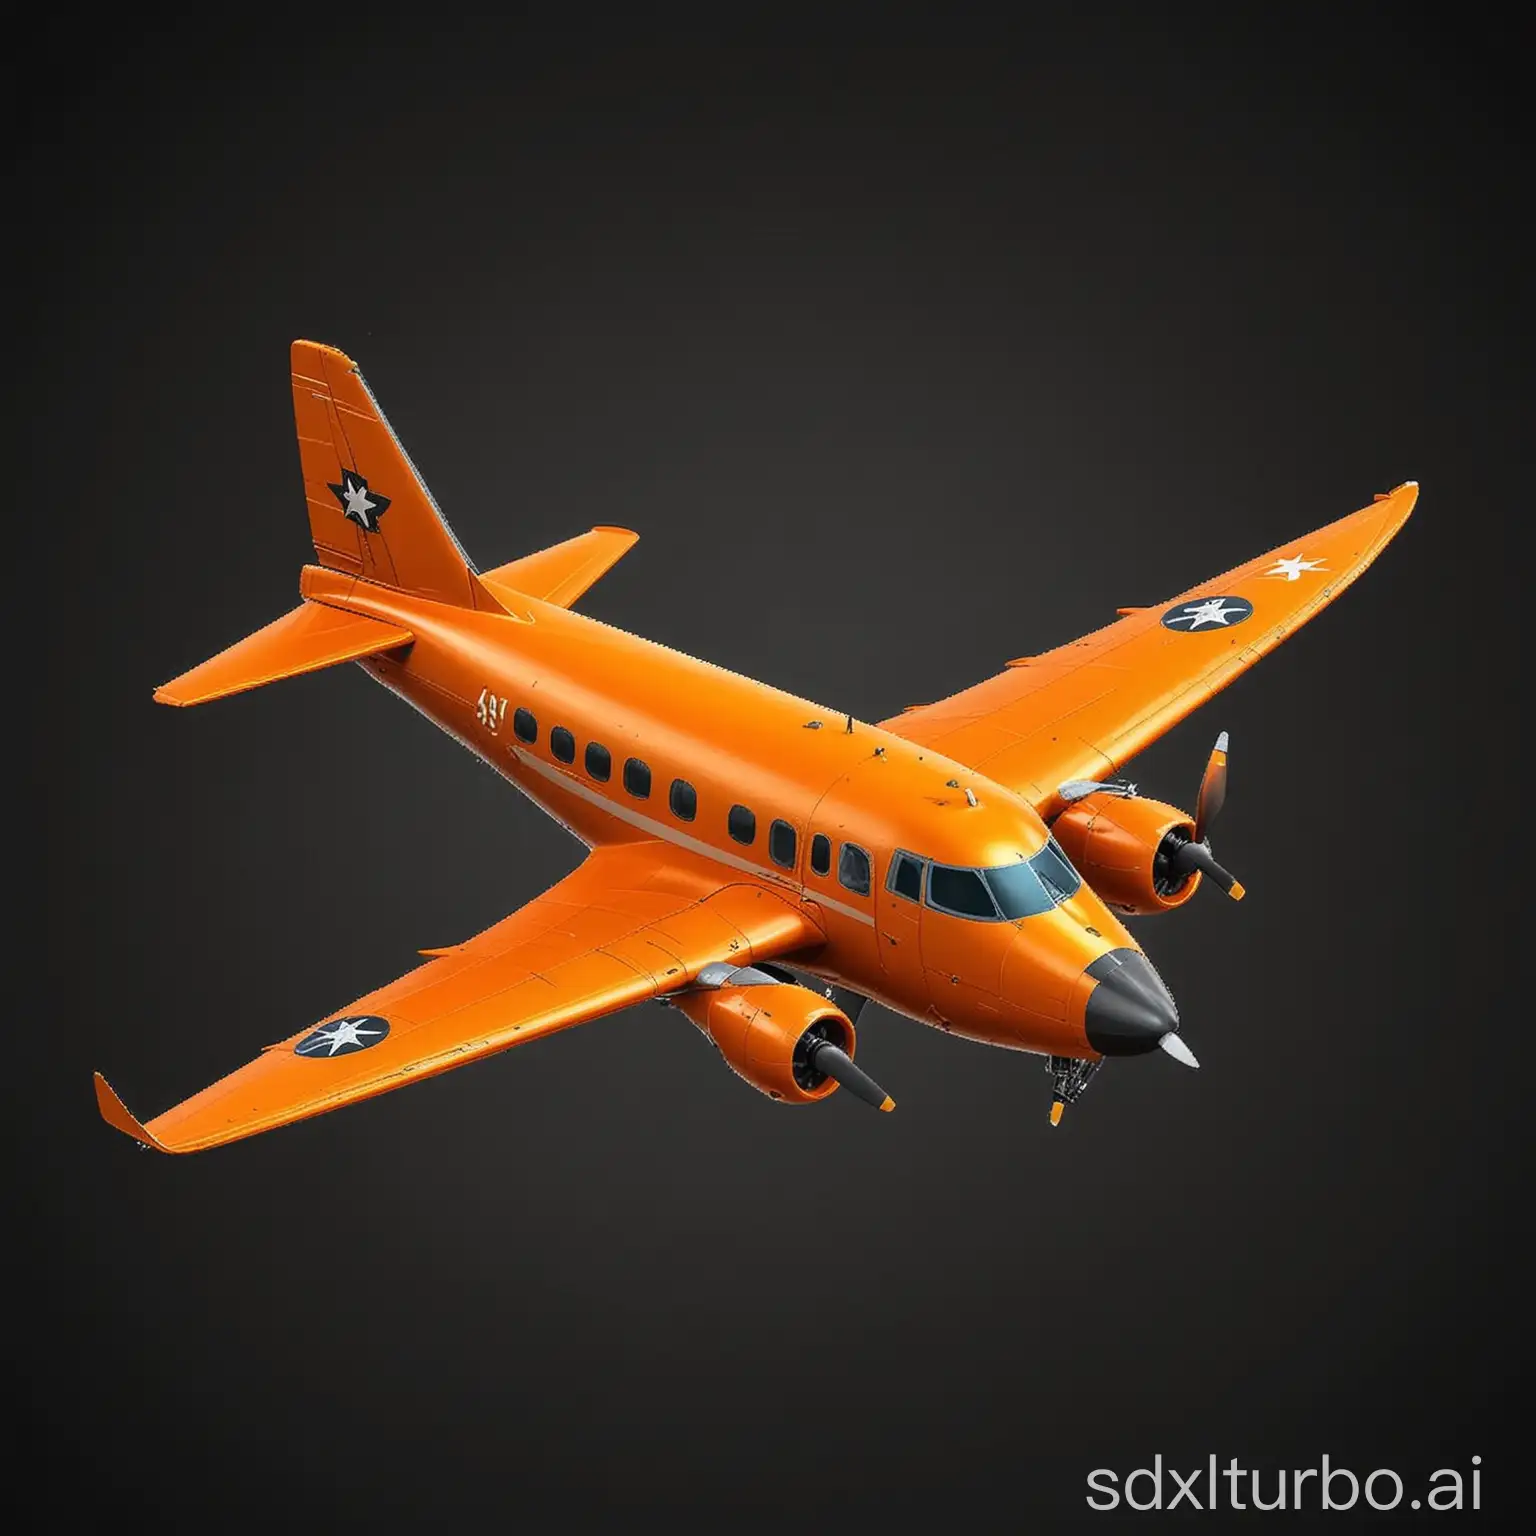 crate a image about a orange color airplane cartoon style isolated on black background, gaem art style